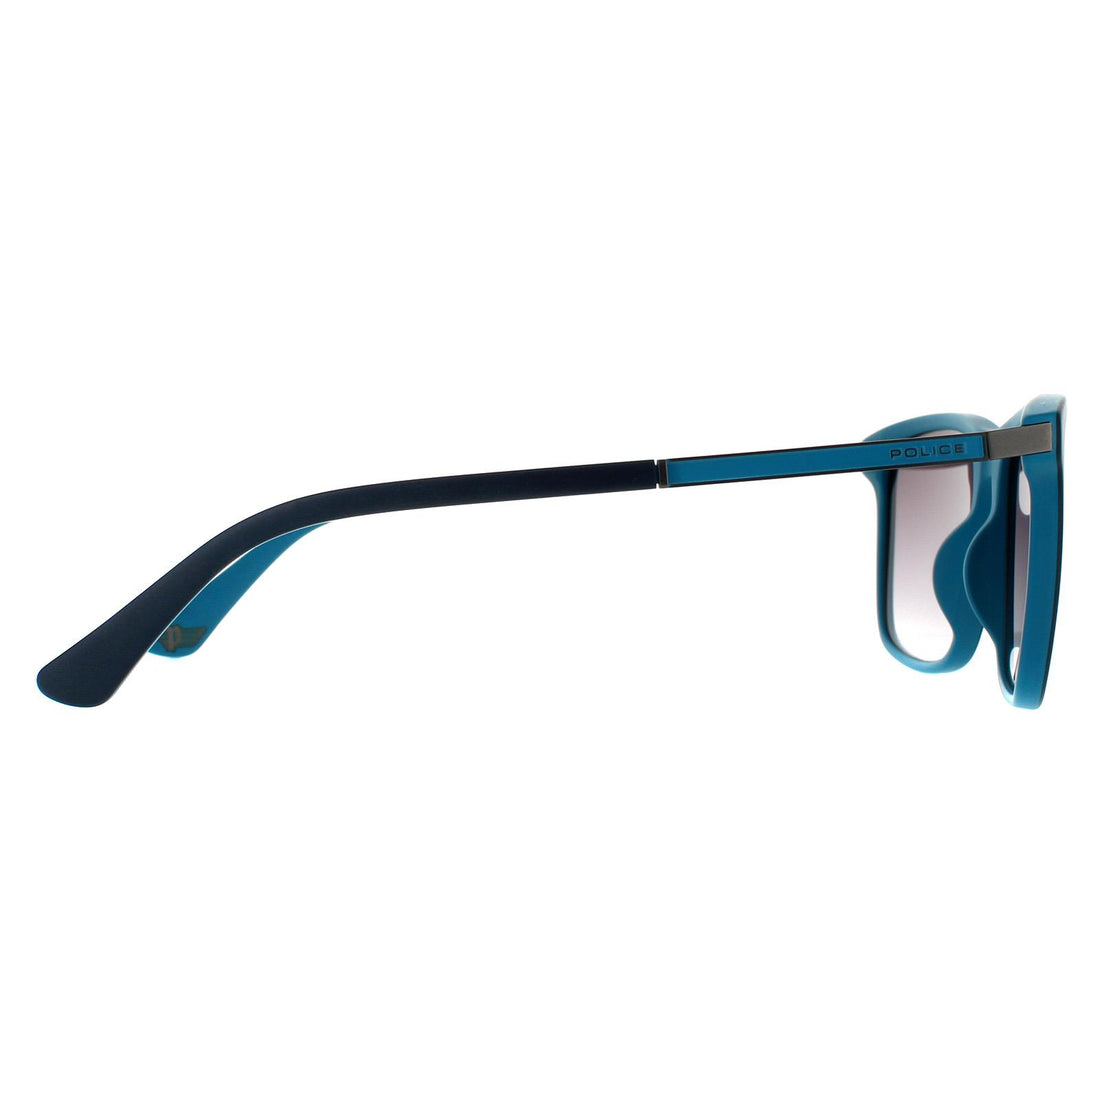 Police Sunglasses SPLA56 Record 1 WTRX Blue Turquoise Blue Gradient Mirrored